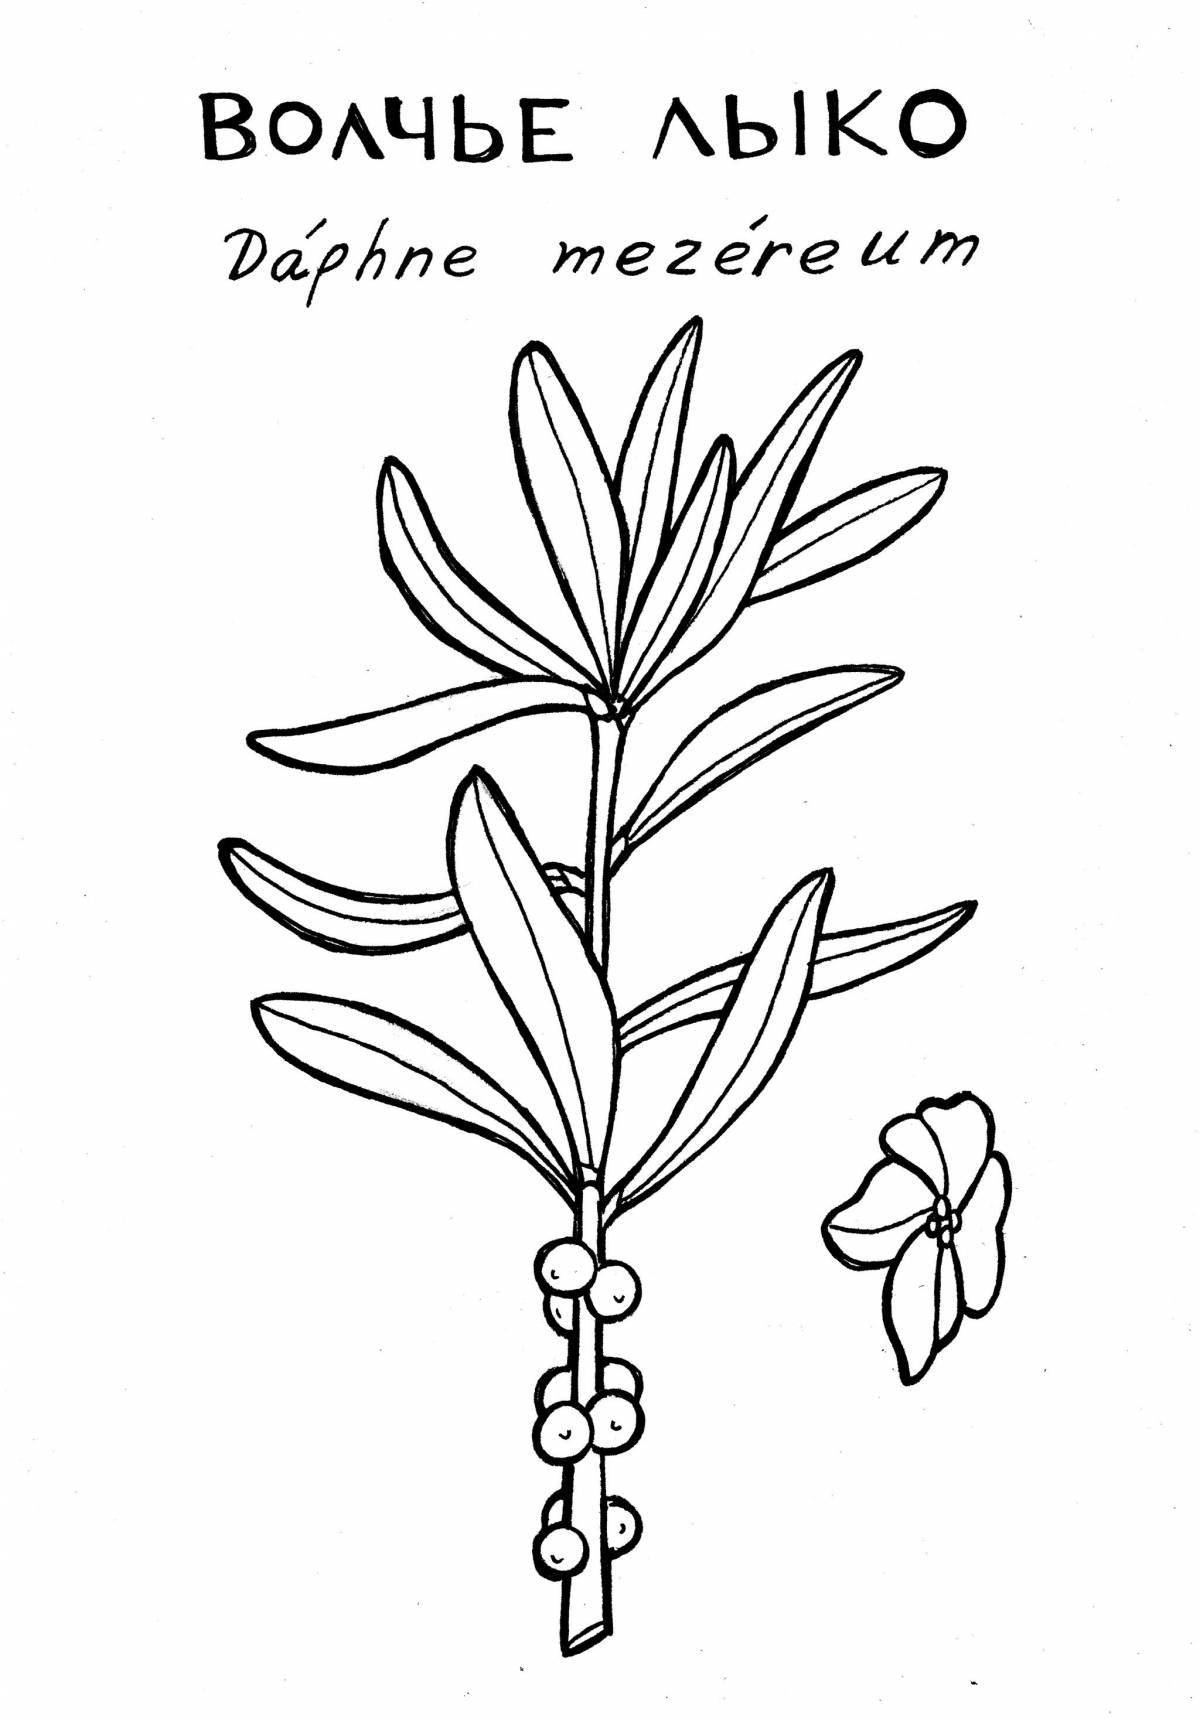 Outstanding sea buckthorn coloring page for kids